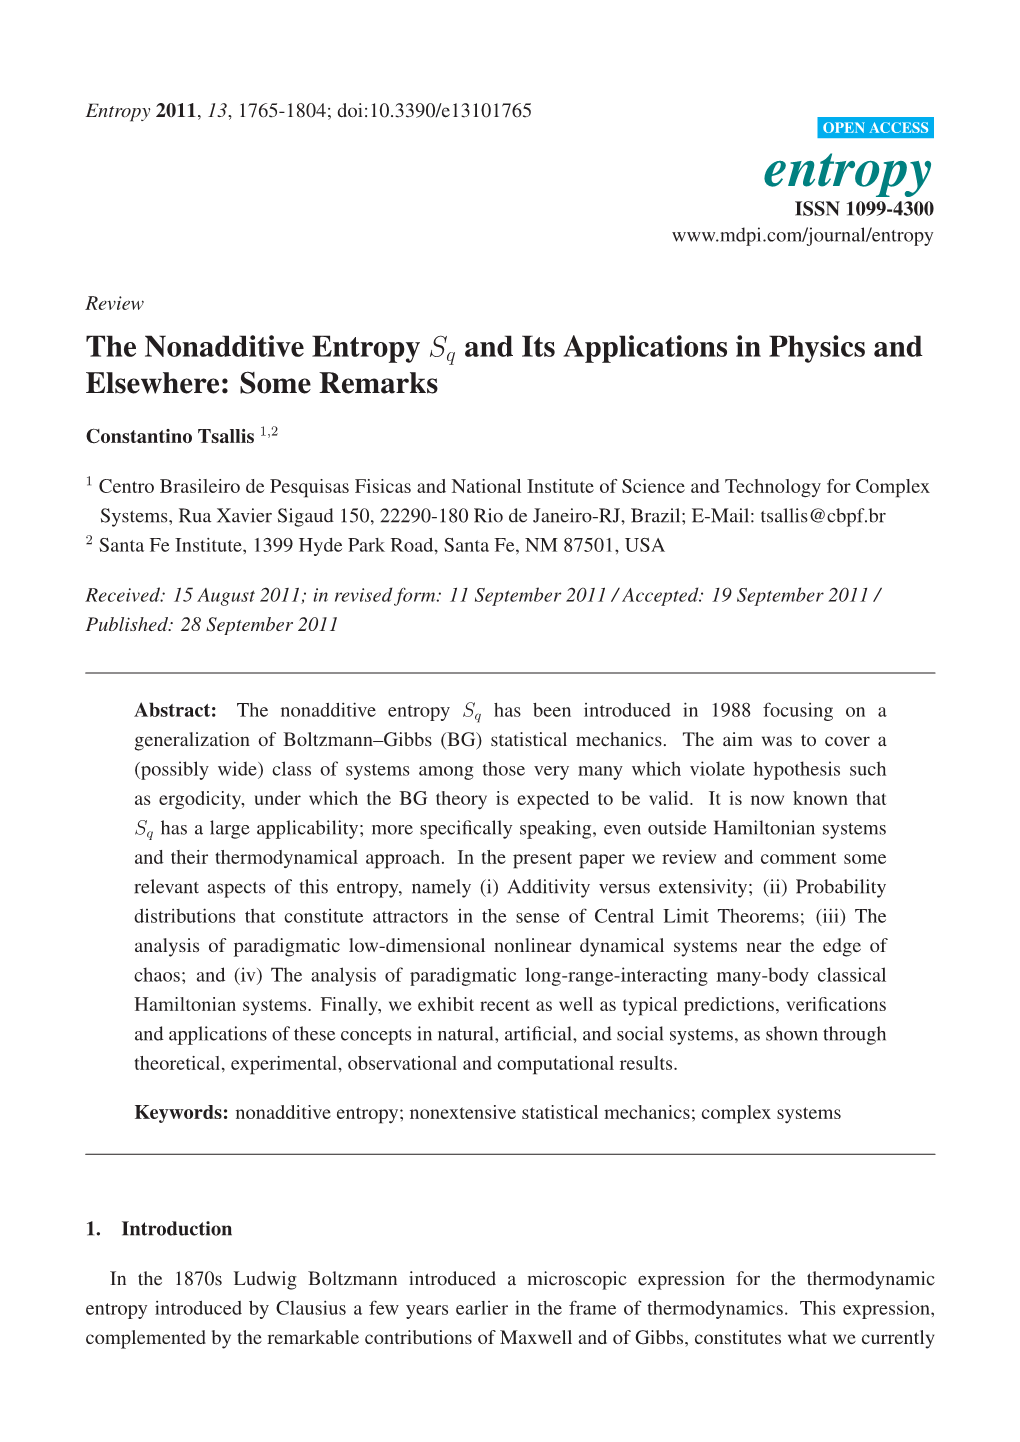 The Nonadditive Entropy Sq and Its Applications in Physics and Elsewhere: Some Remarks